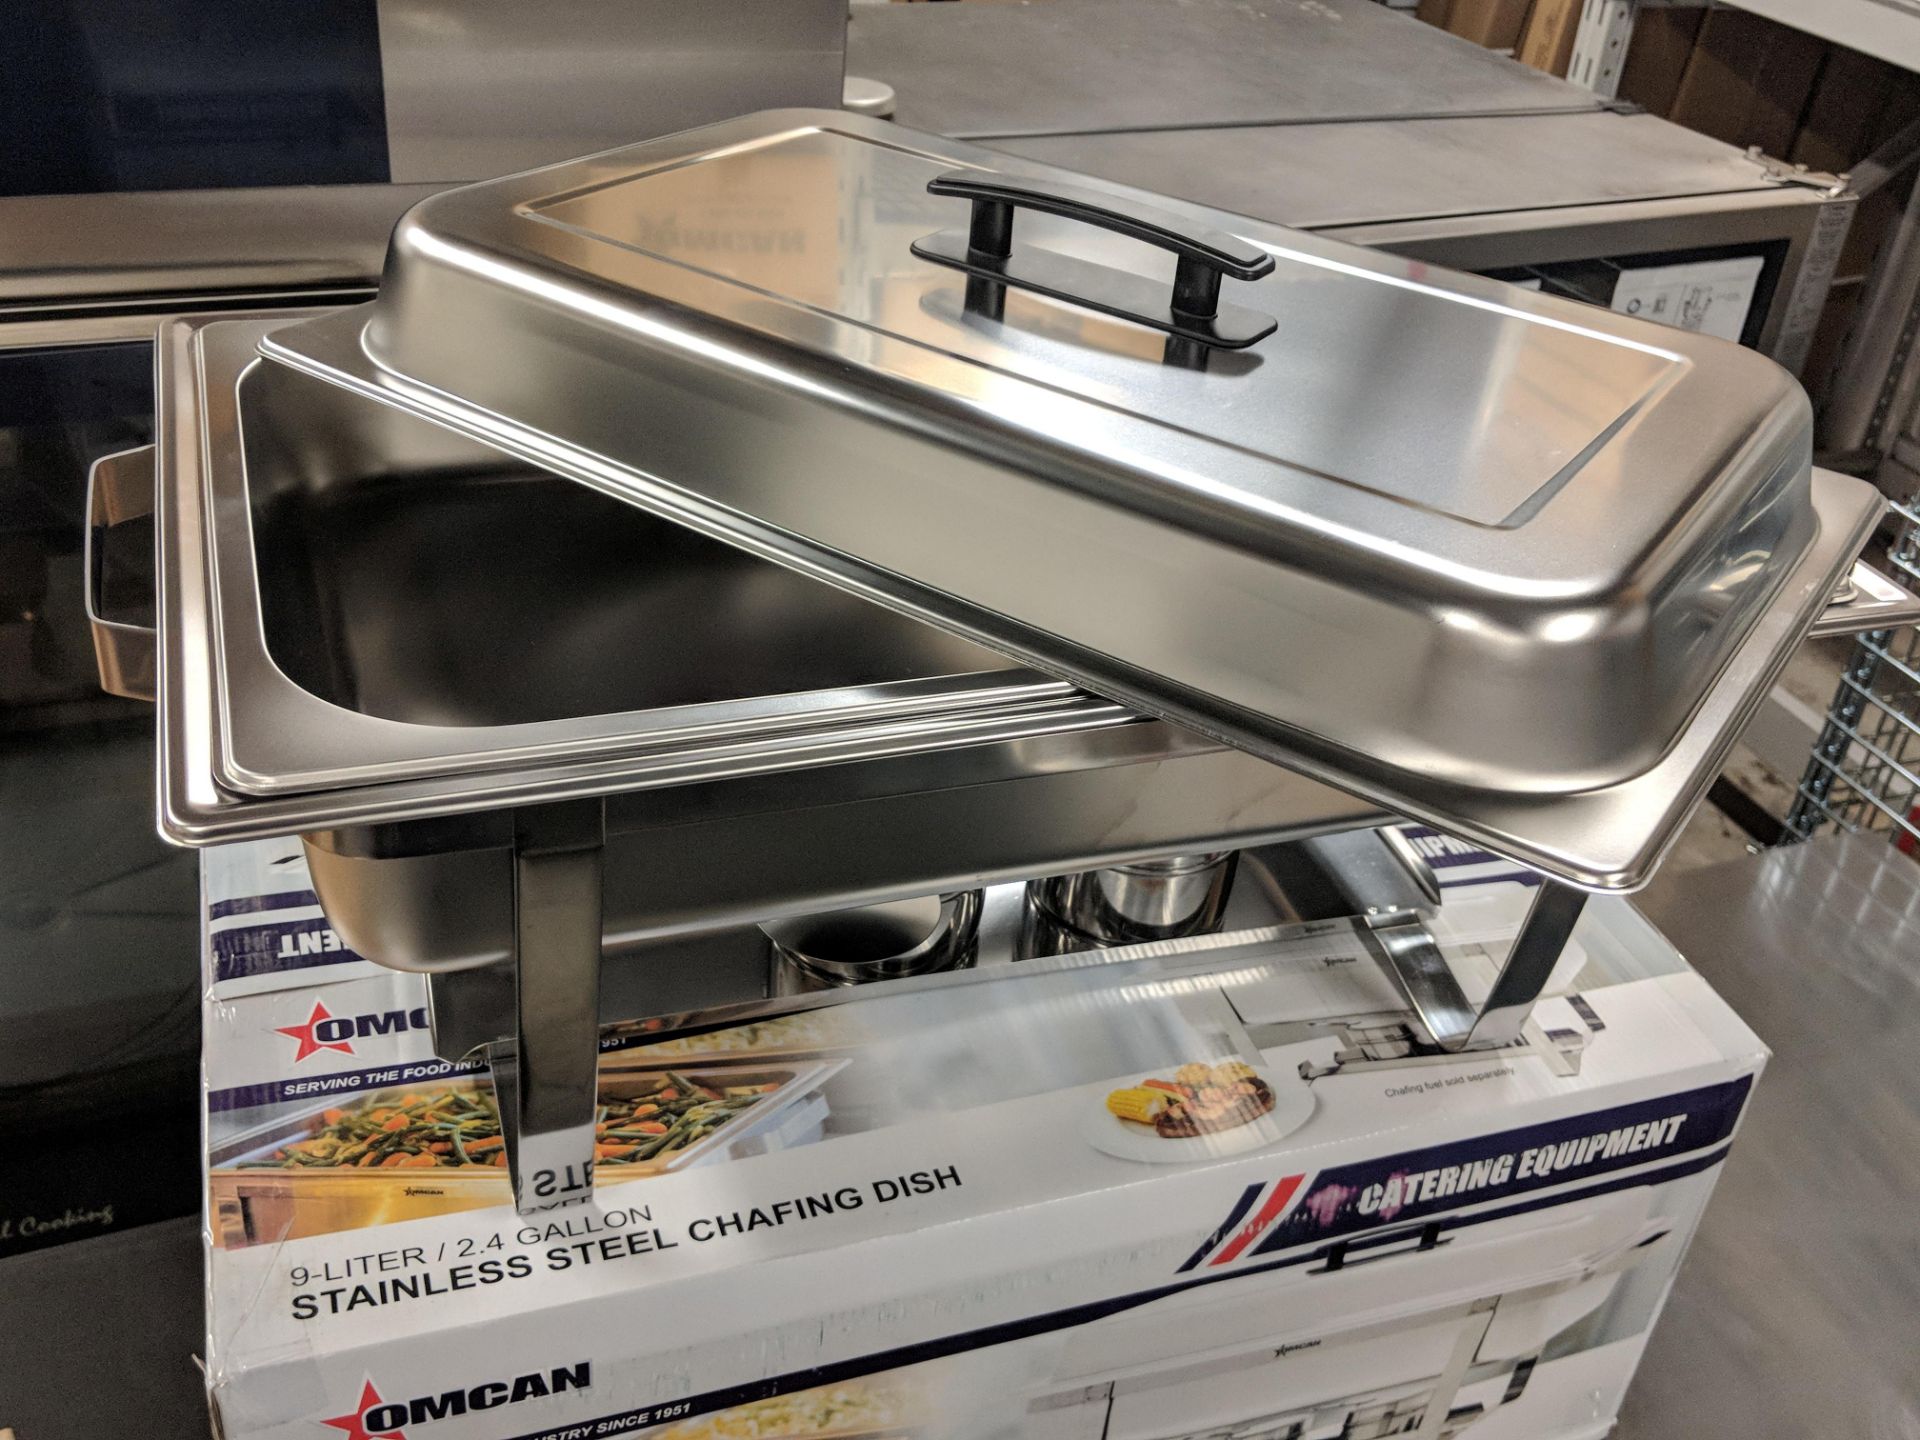 9L Stainless Chafing Dish with Fixed Legs - Image 2 of 2